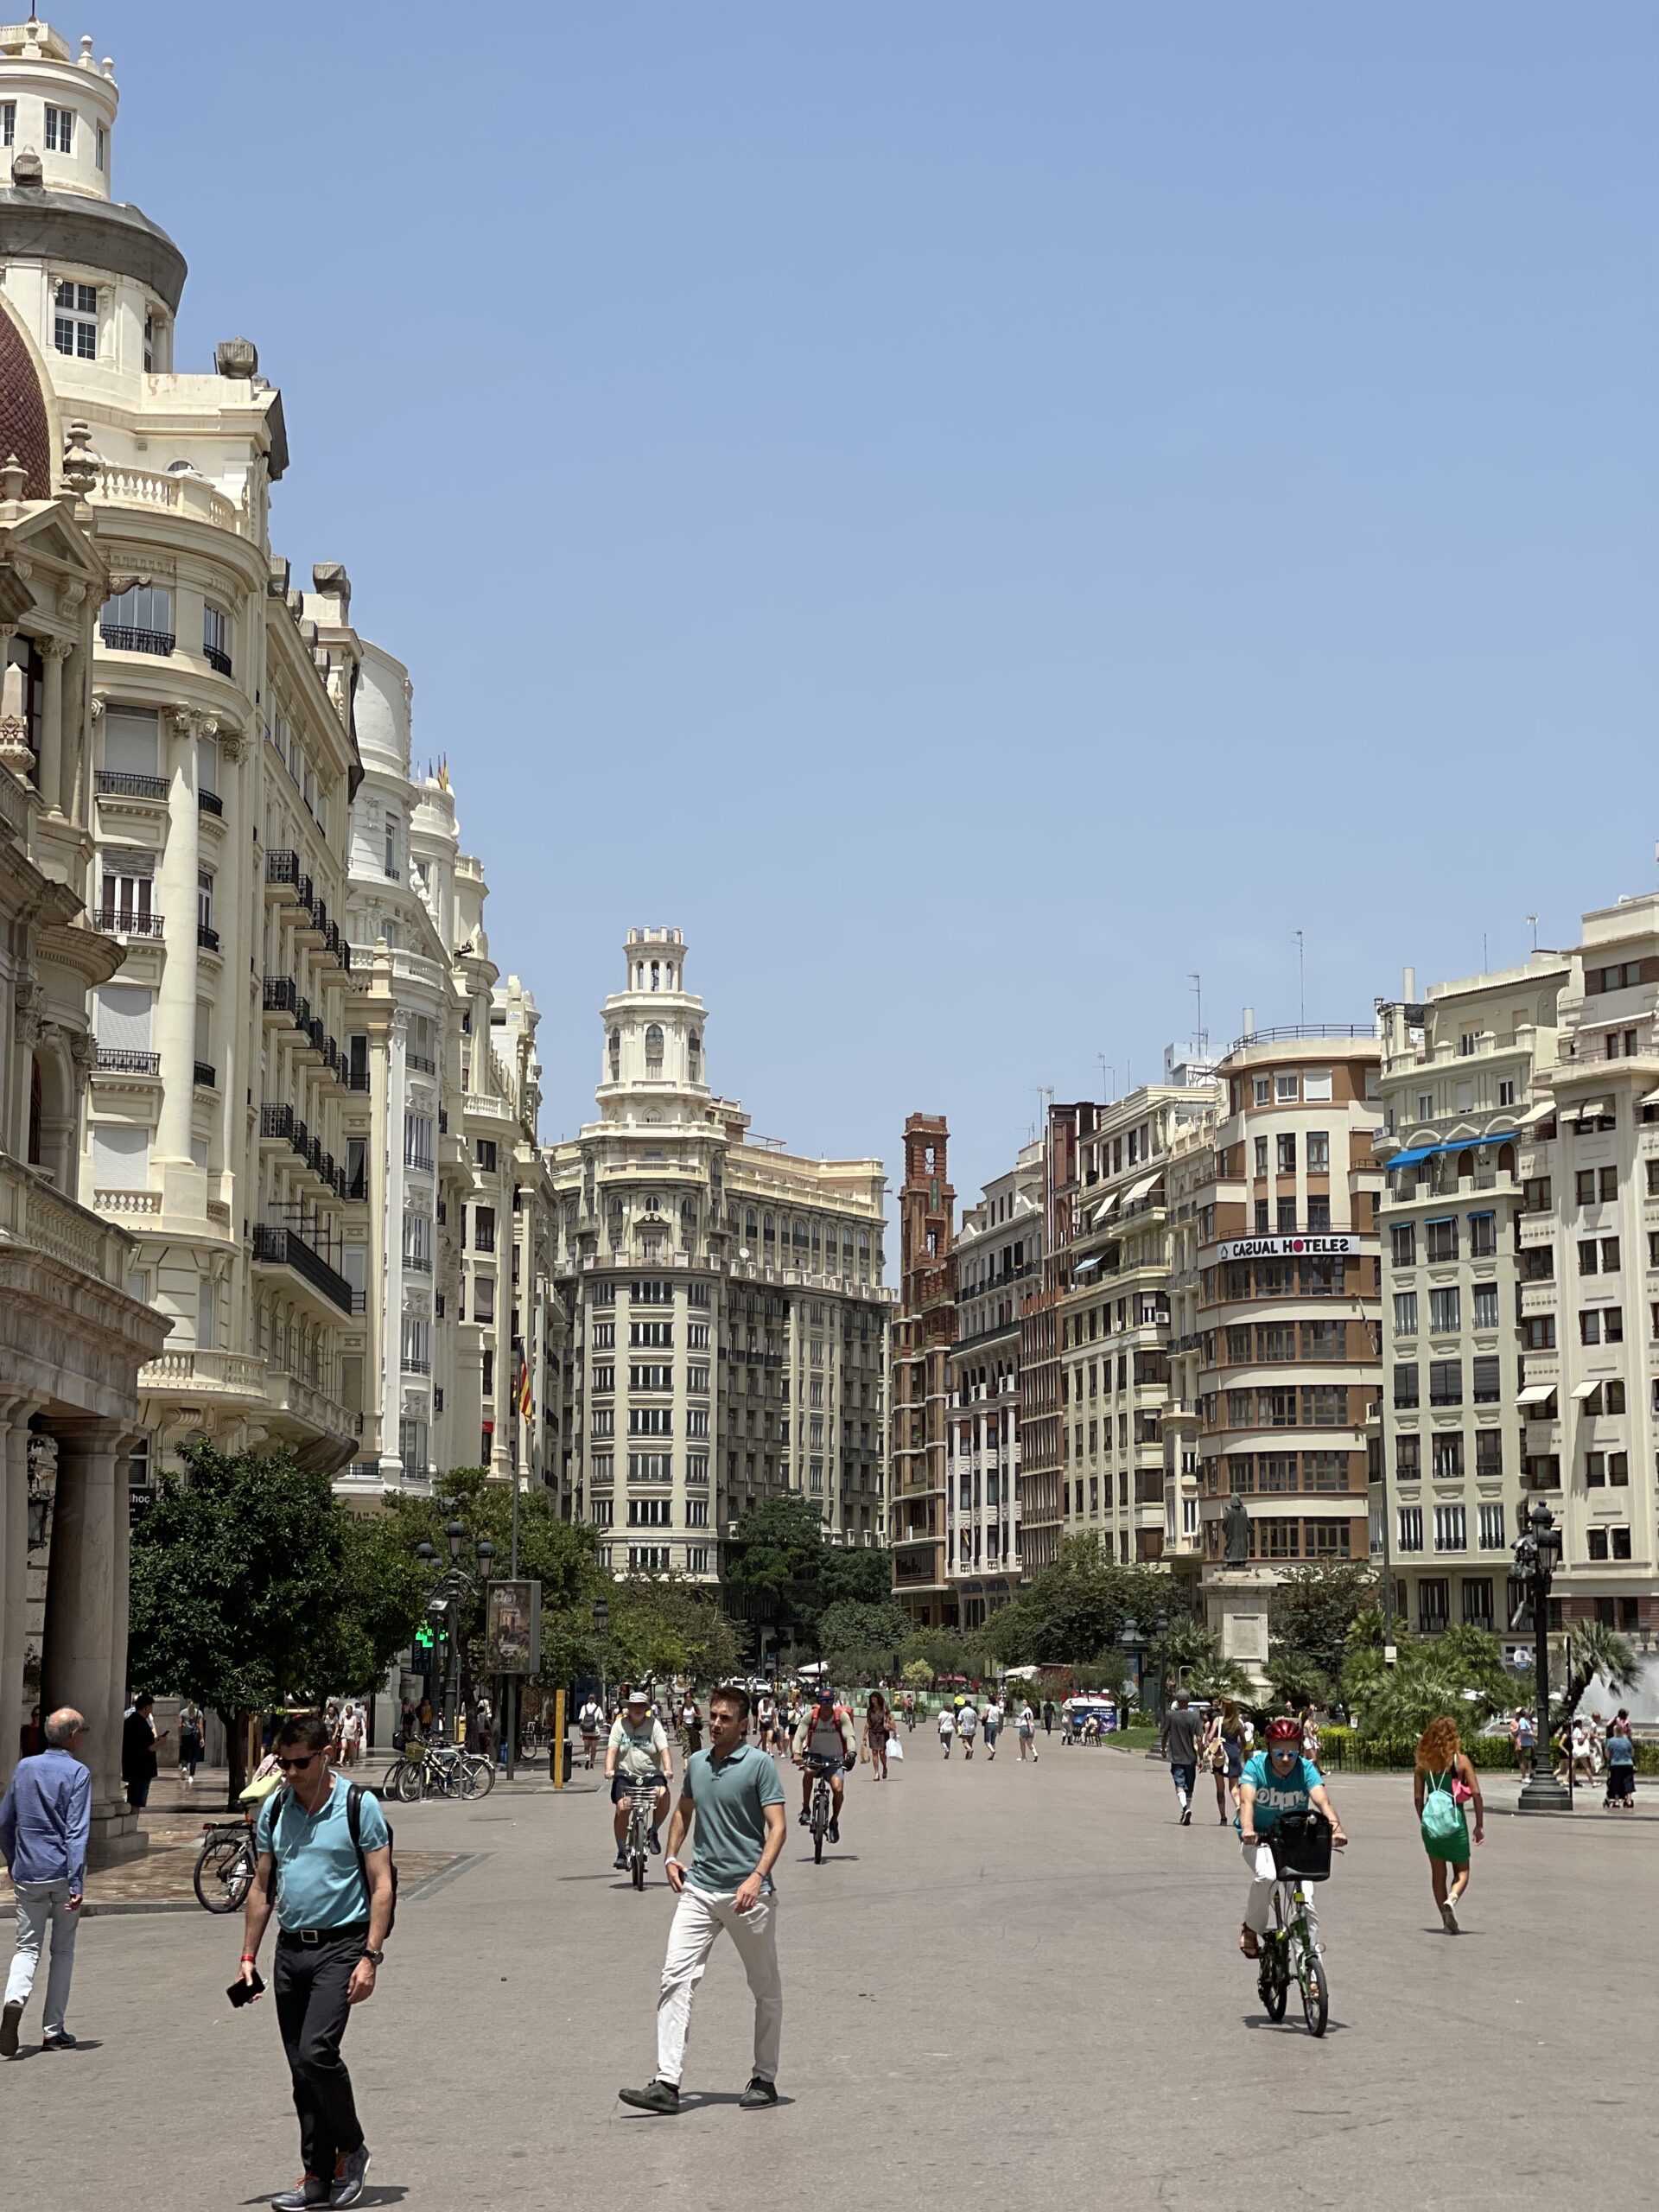 Valencia a vibrant city located on the southeastern coast of Spain scaled